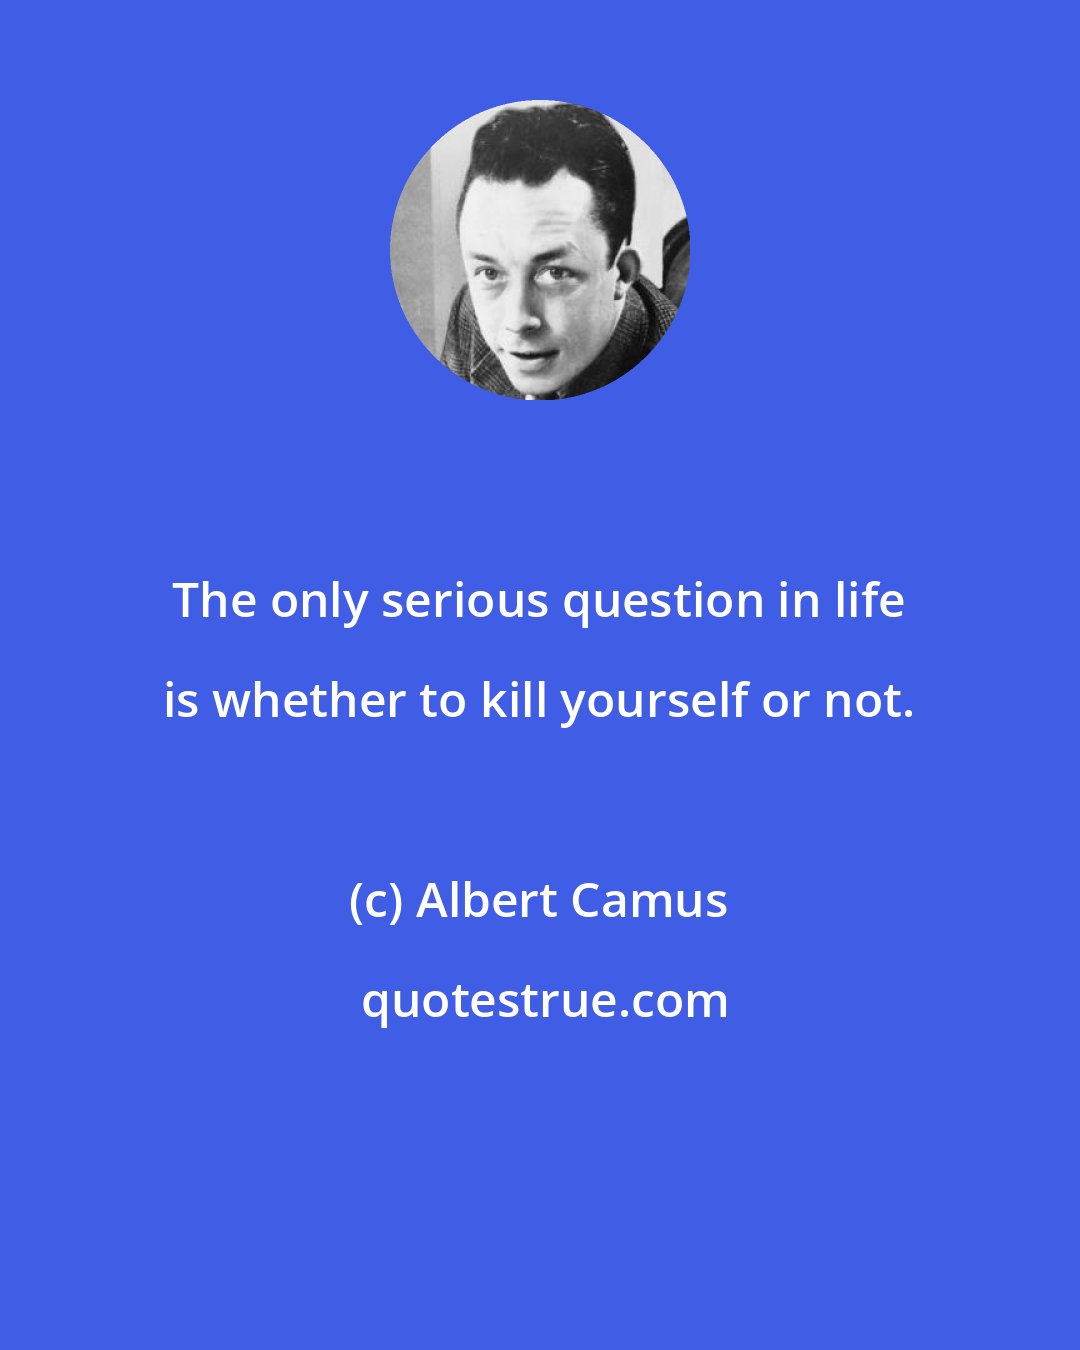 Albert Camus: The only serious question in life is whether to kill yourself or not.